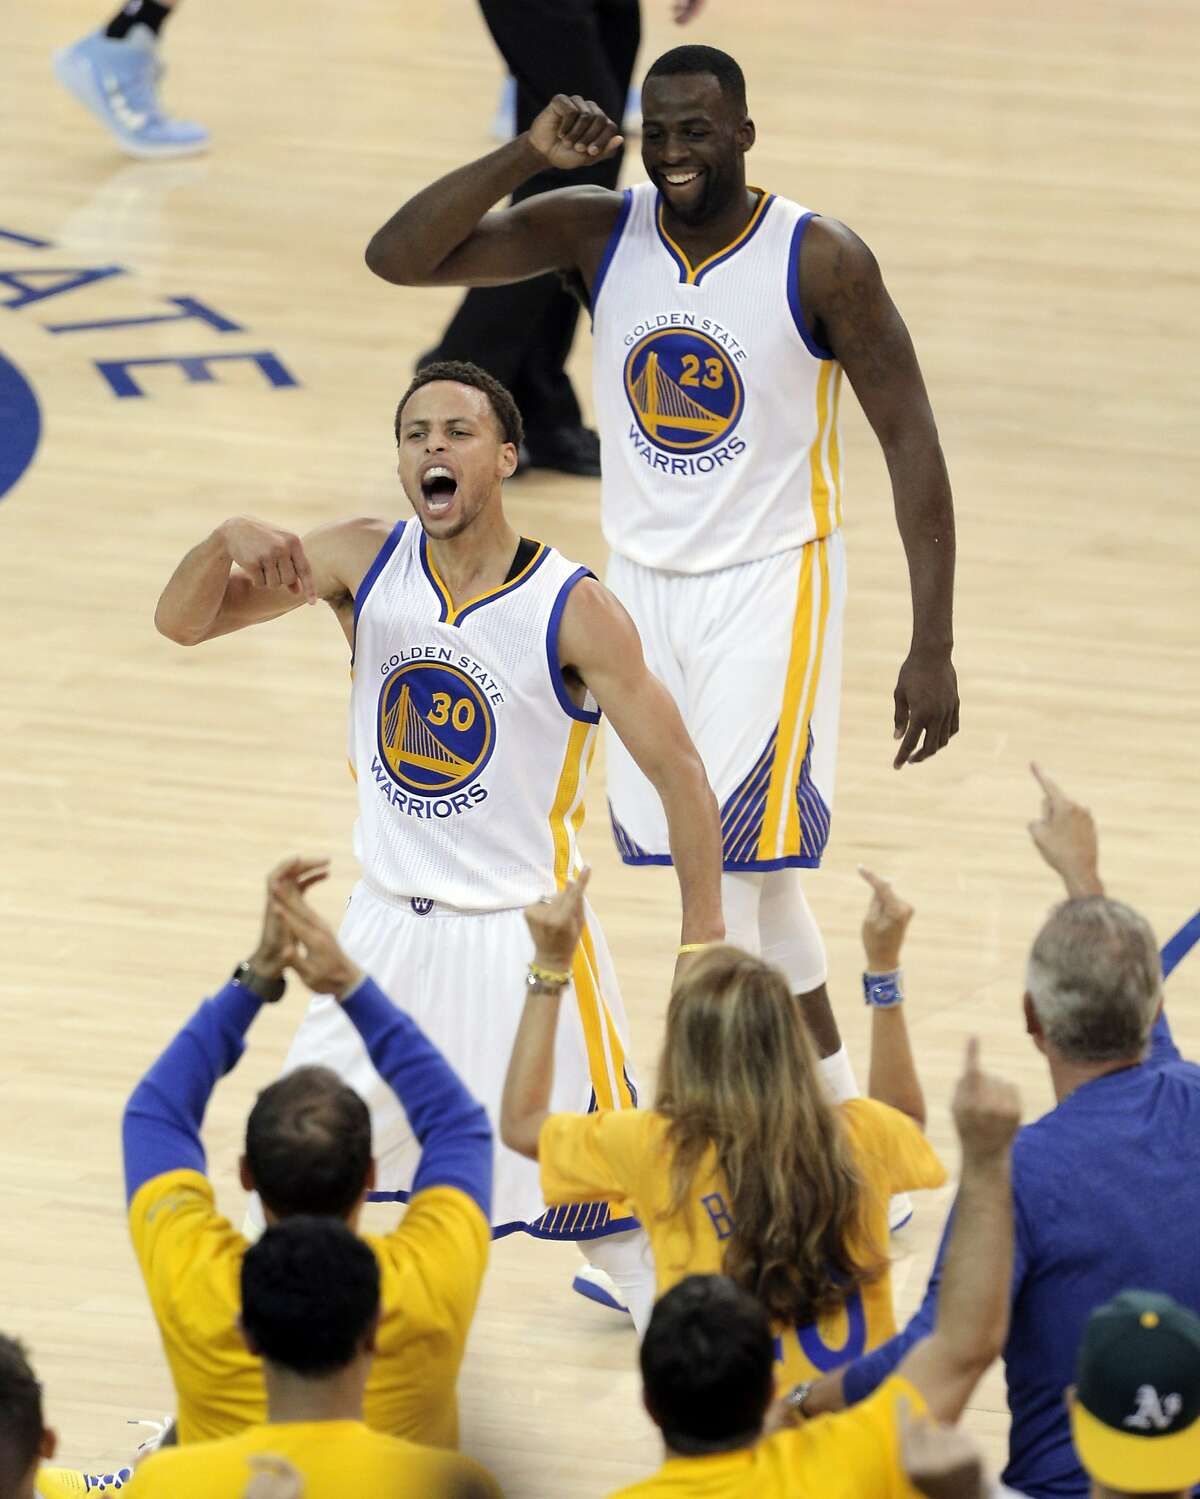 Stephen Curry (30) reacts after hitting a three-pointer to tie the game In the first half. The Golden State Warriors played the Memphis Grizzlies in Game 5 of the Western Conference Semifinals at Oracle Arena in Oakland, Calif., on Wednesday, May 13, 2015.